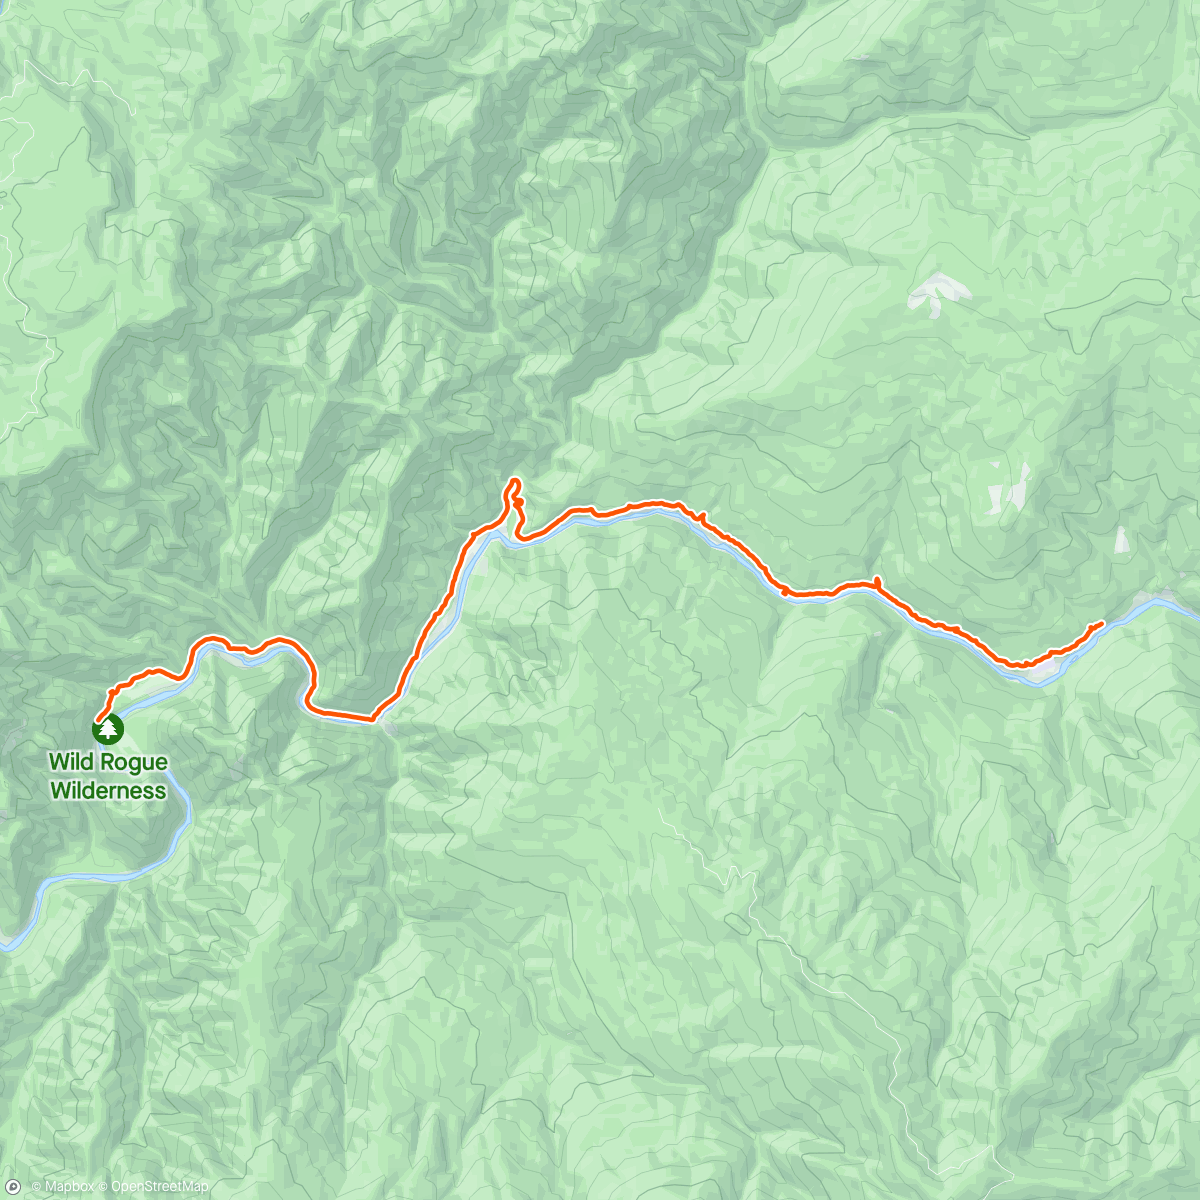 「Rogue River Trail - Day 2」活動的地圖